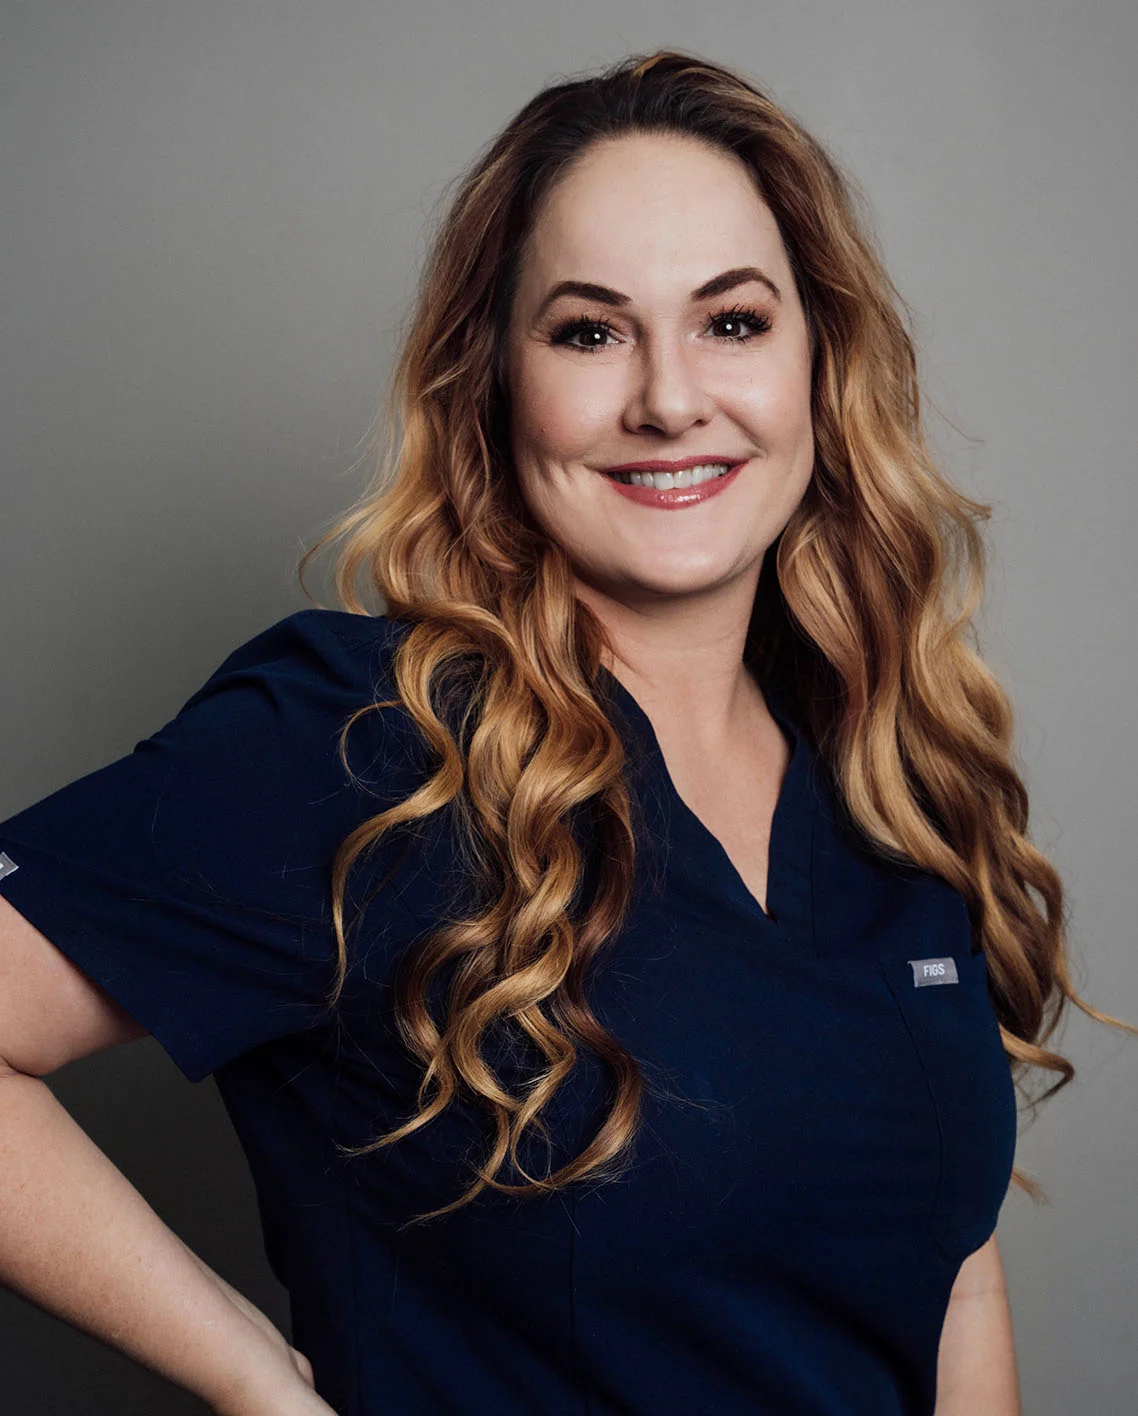 Cari Pothier - Medical Aesthetician at Skin Care 5th Ave.